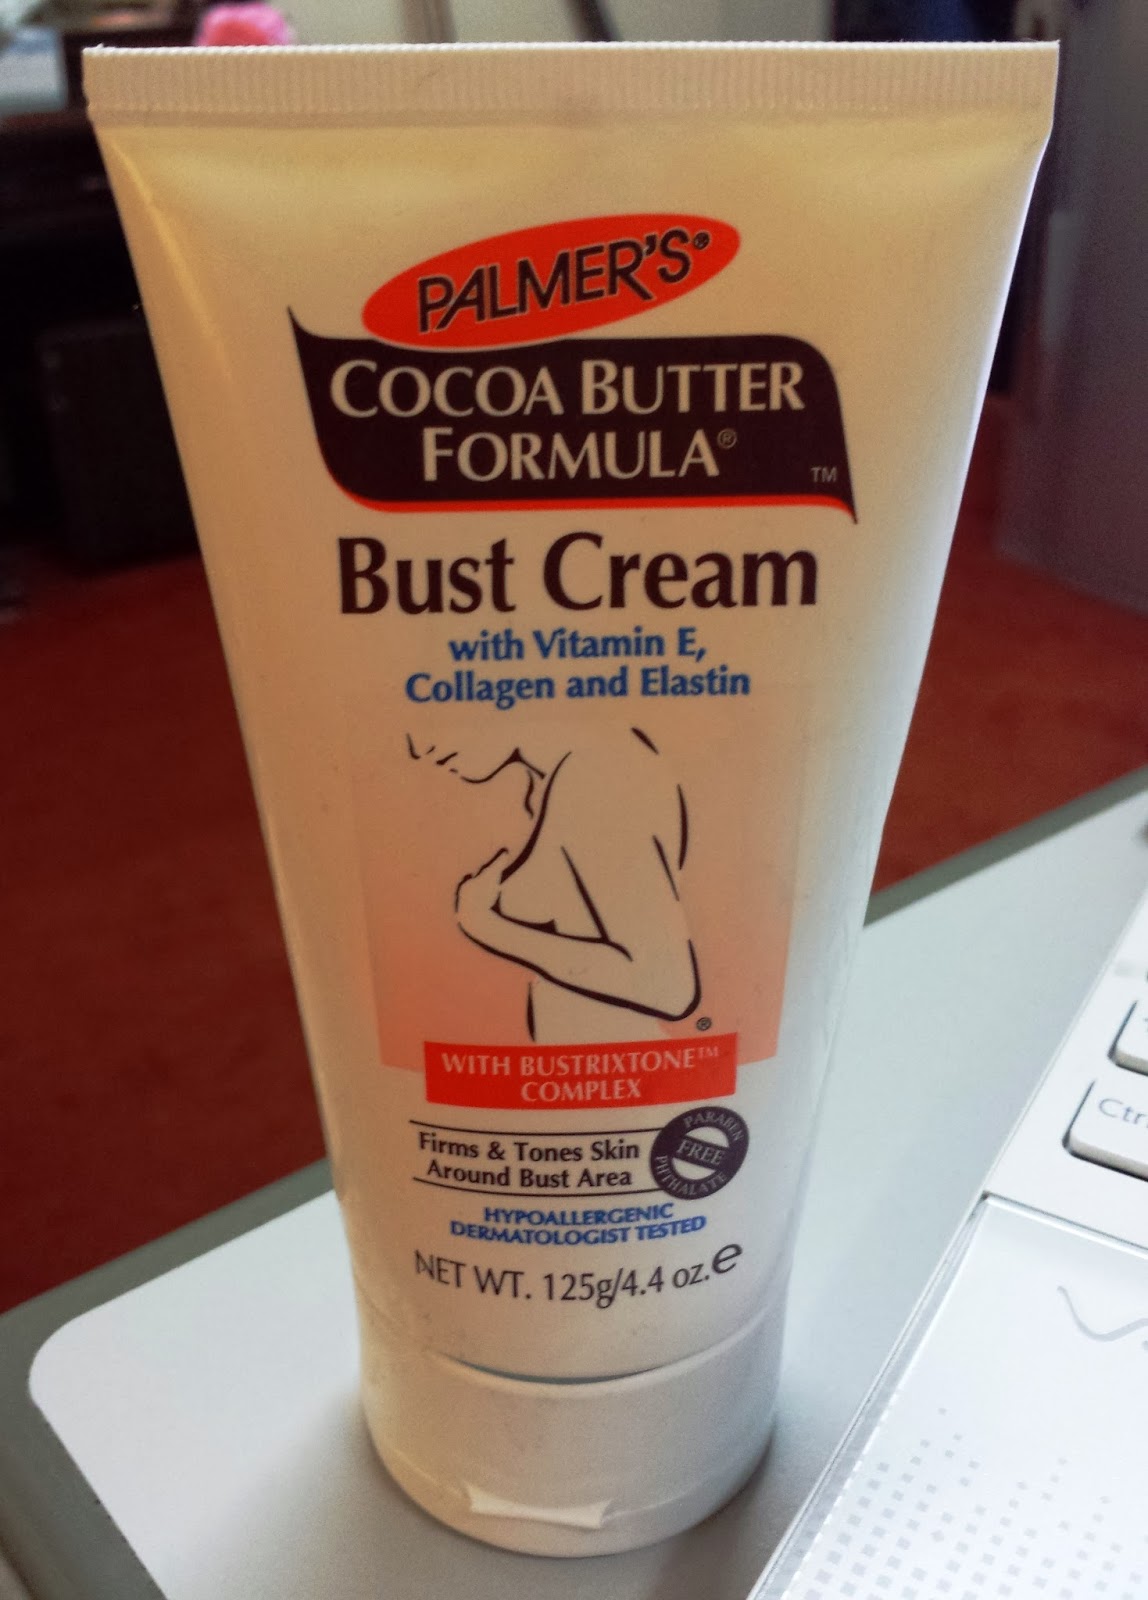 Palmer's Cocoa Butter Formula Bust Cream – Review